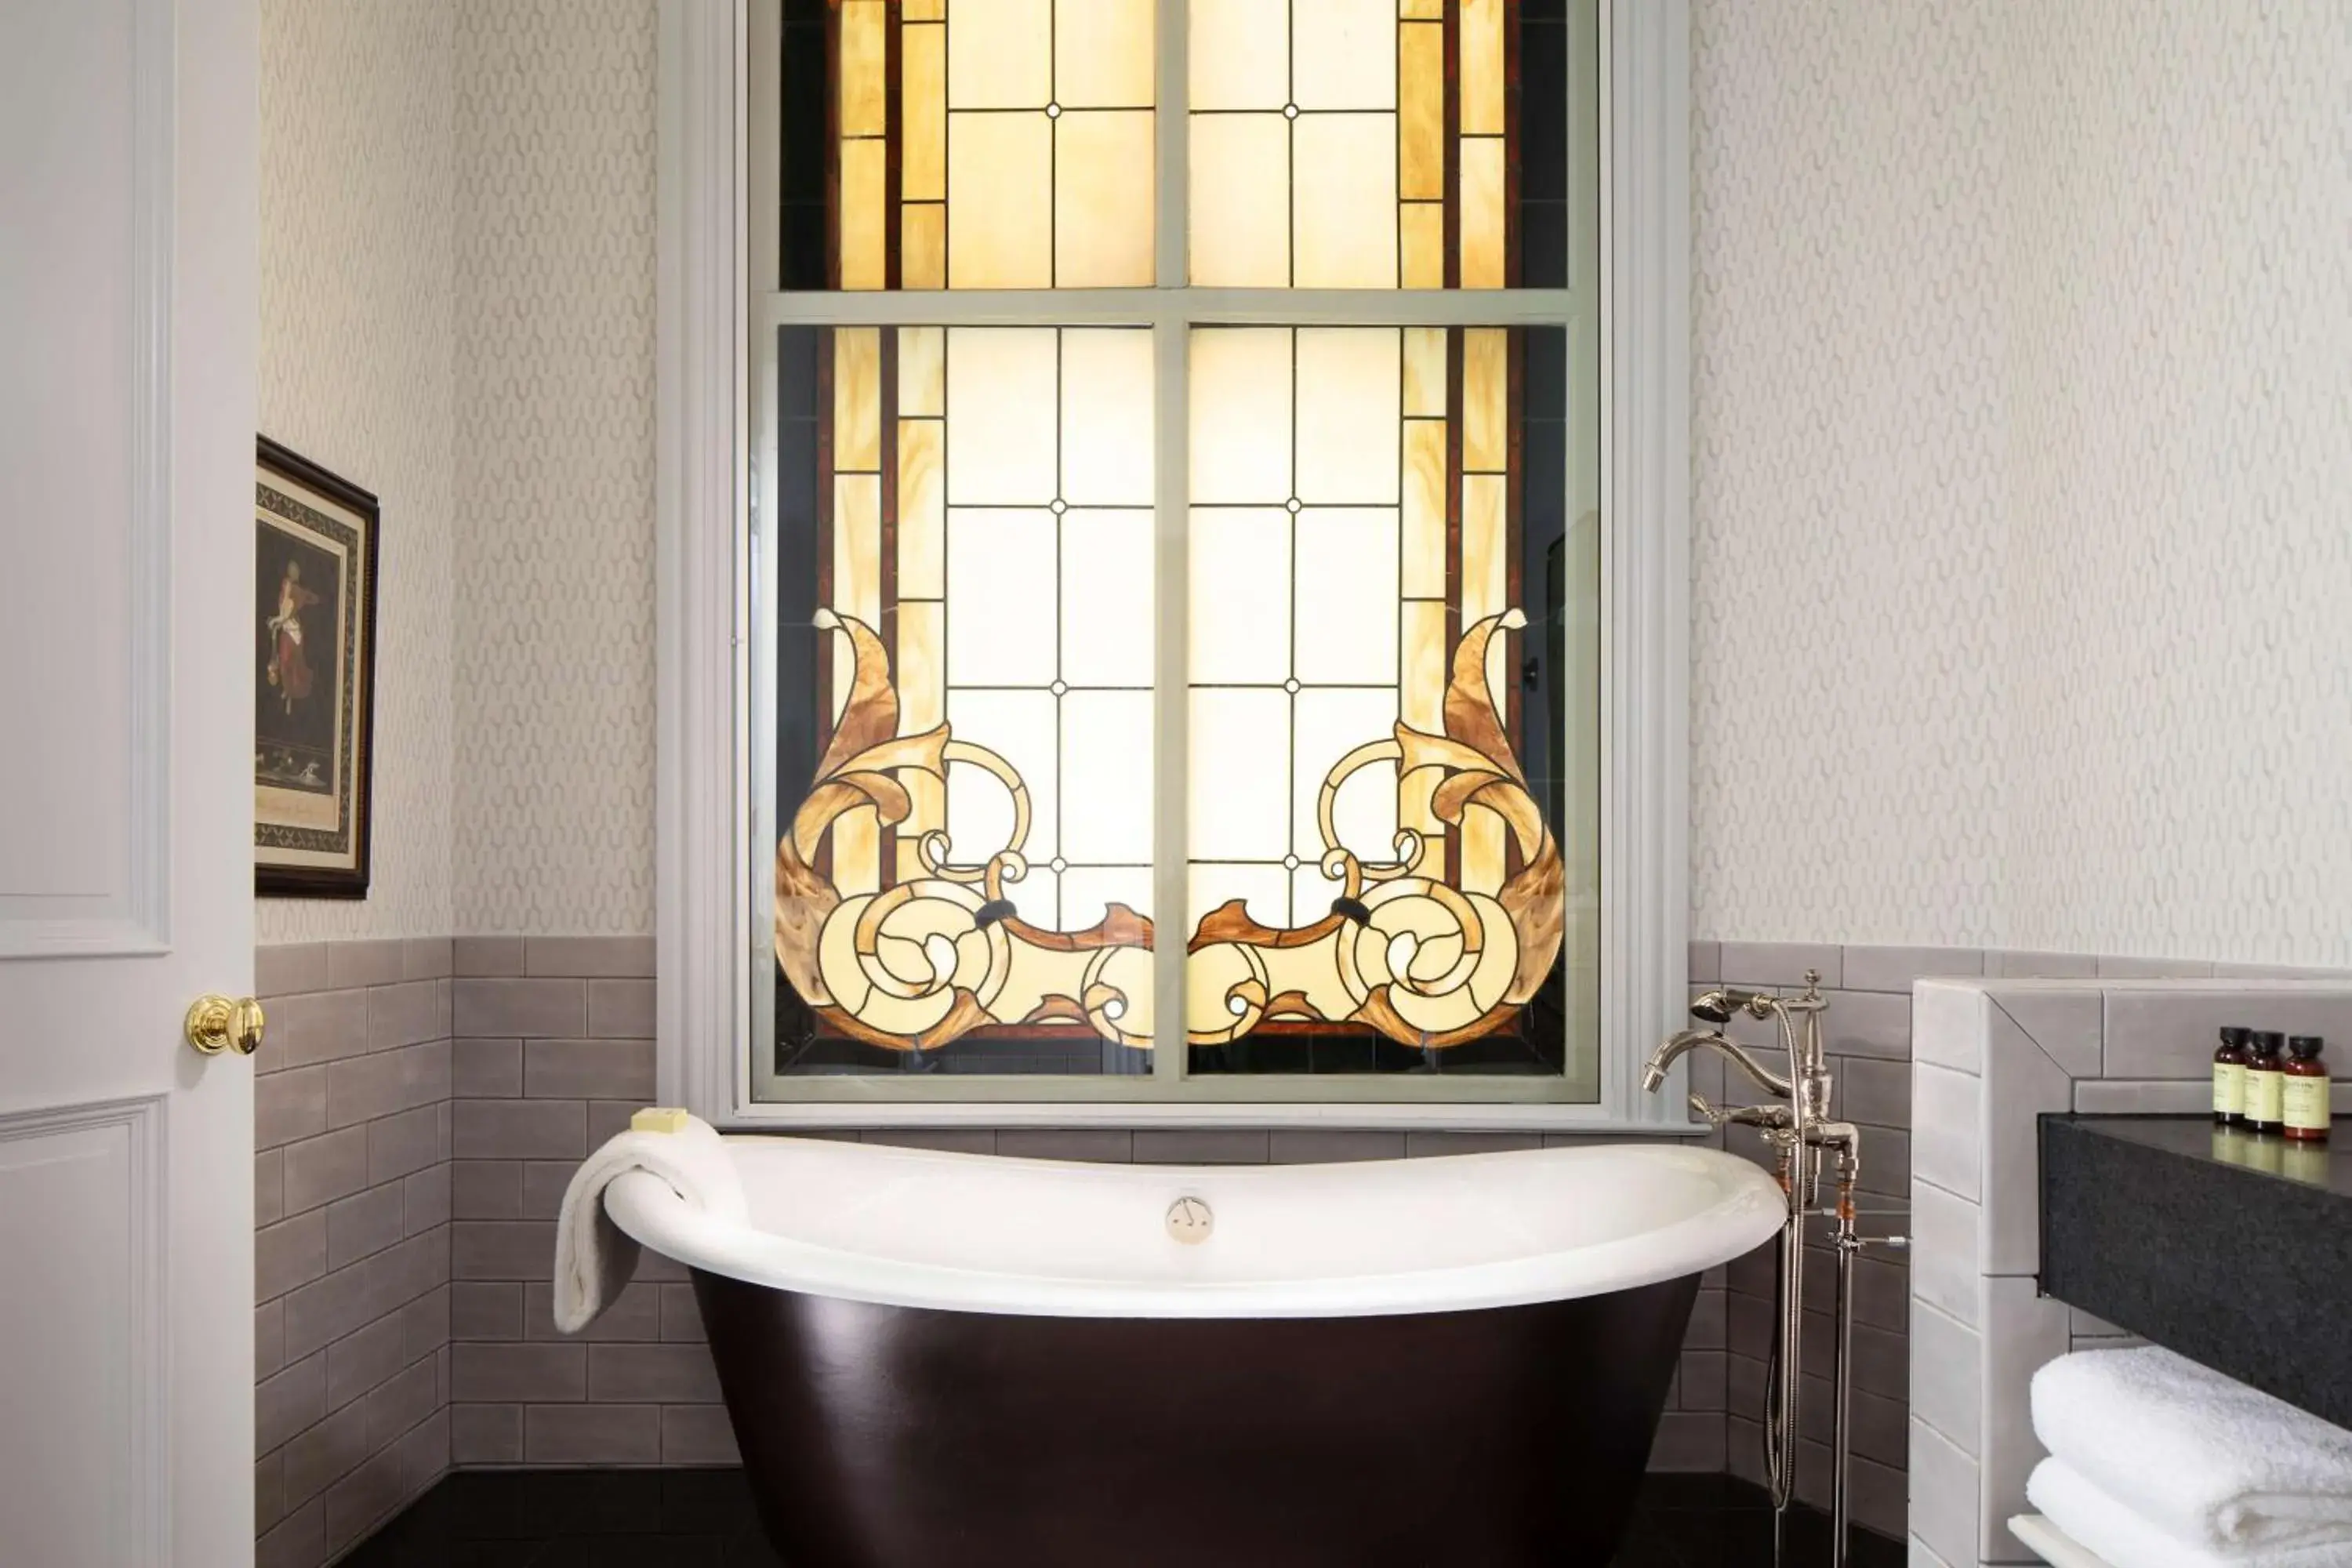 Bathroom in The Driskill, in The Unbound Collection by Hyatt